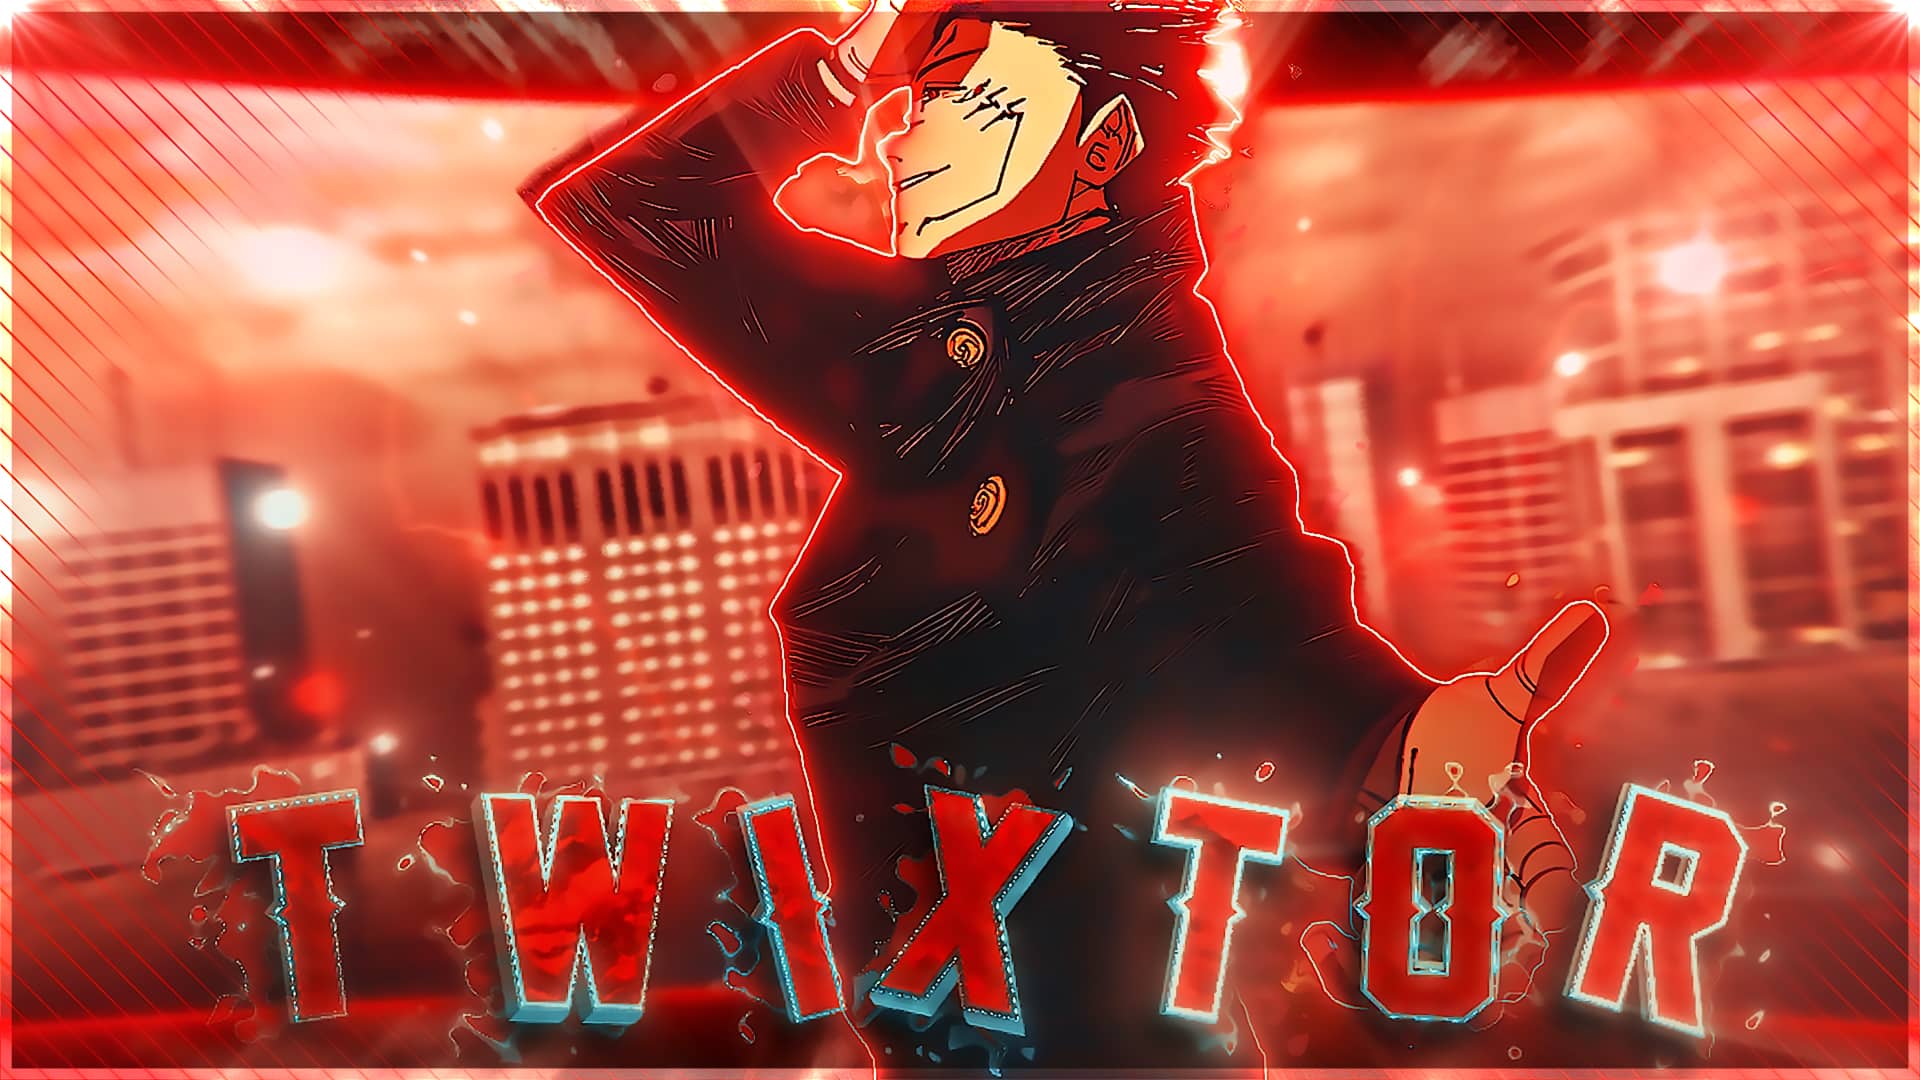 Jujutsu kaisen Culling Game 4K Twixtor Clips + CC for Editing